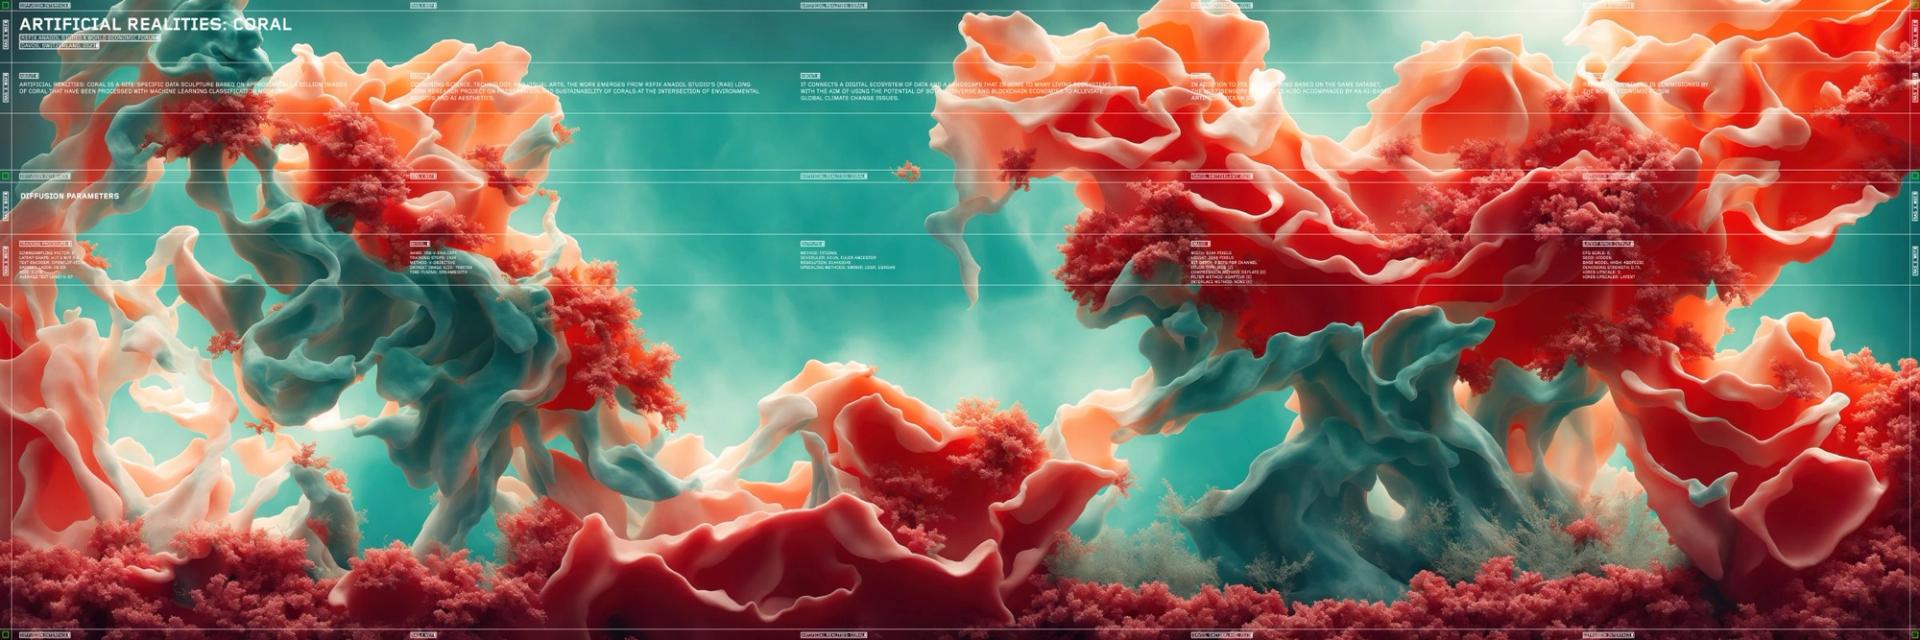 Refik Anadol's Artificial Realities: Coral — 08 (2023)

Courtesy of the artist



